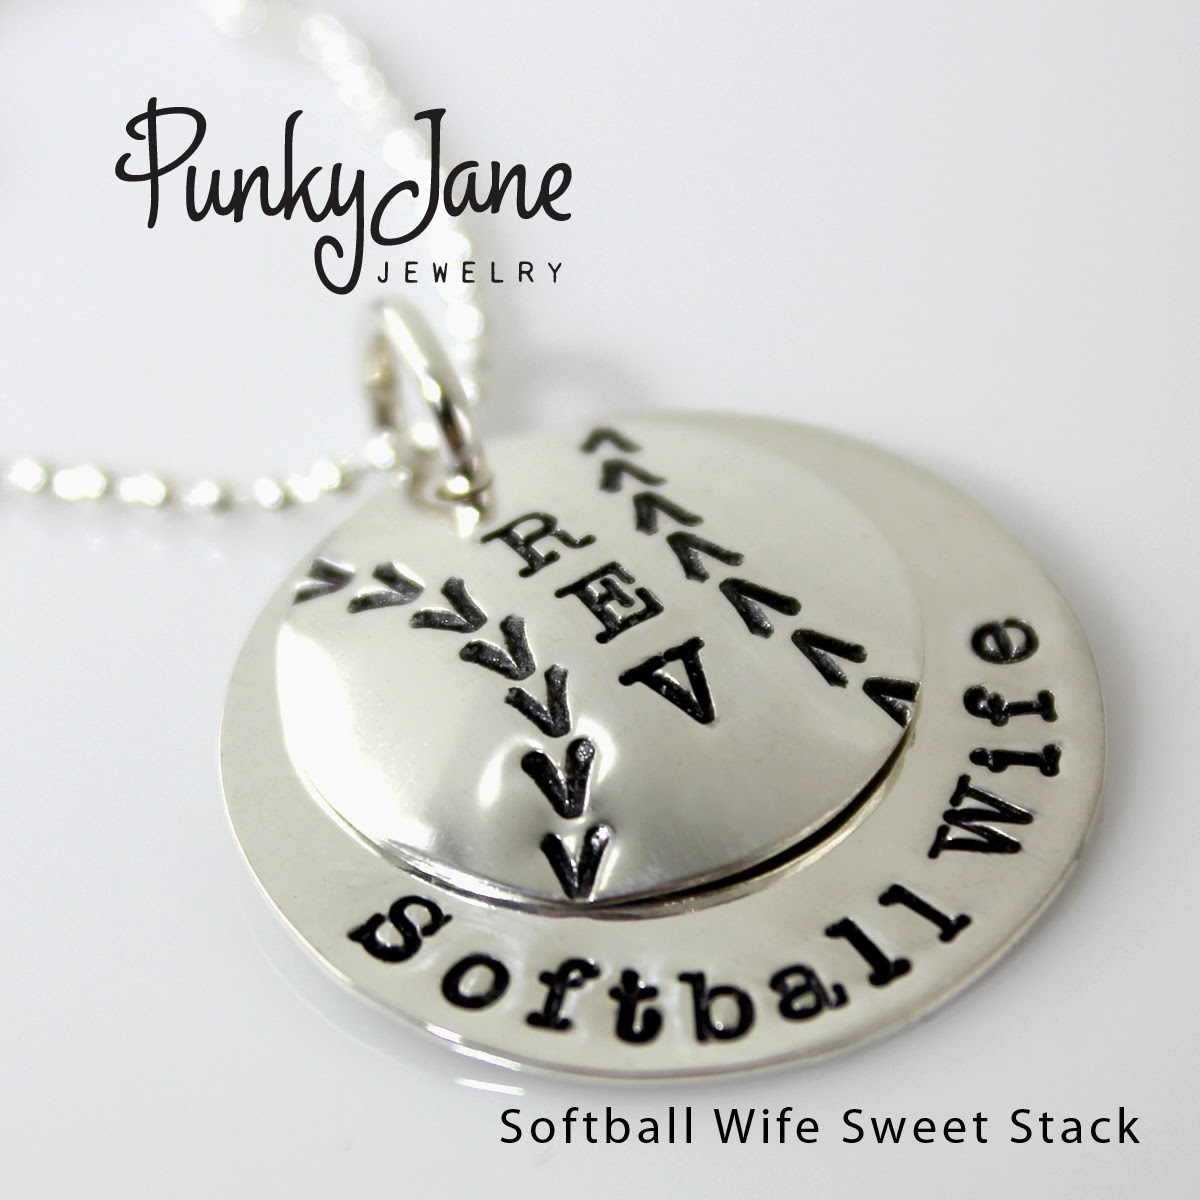 http://shop.punkyjane.com/Softball-Wife-Sweet-Stack-hand-stamped-and-personalized-necklace-2180.htm